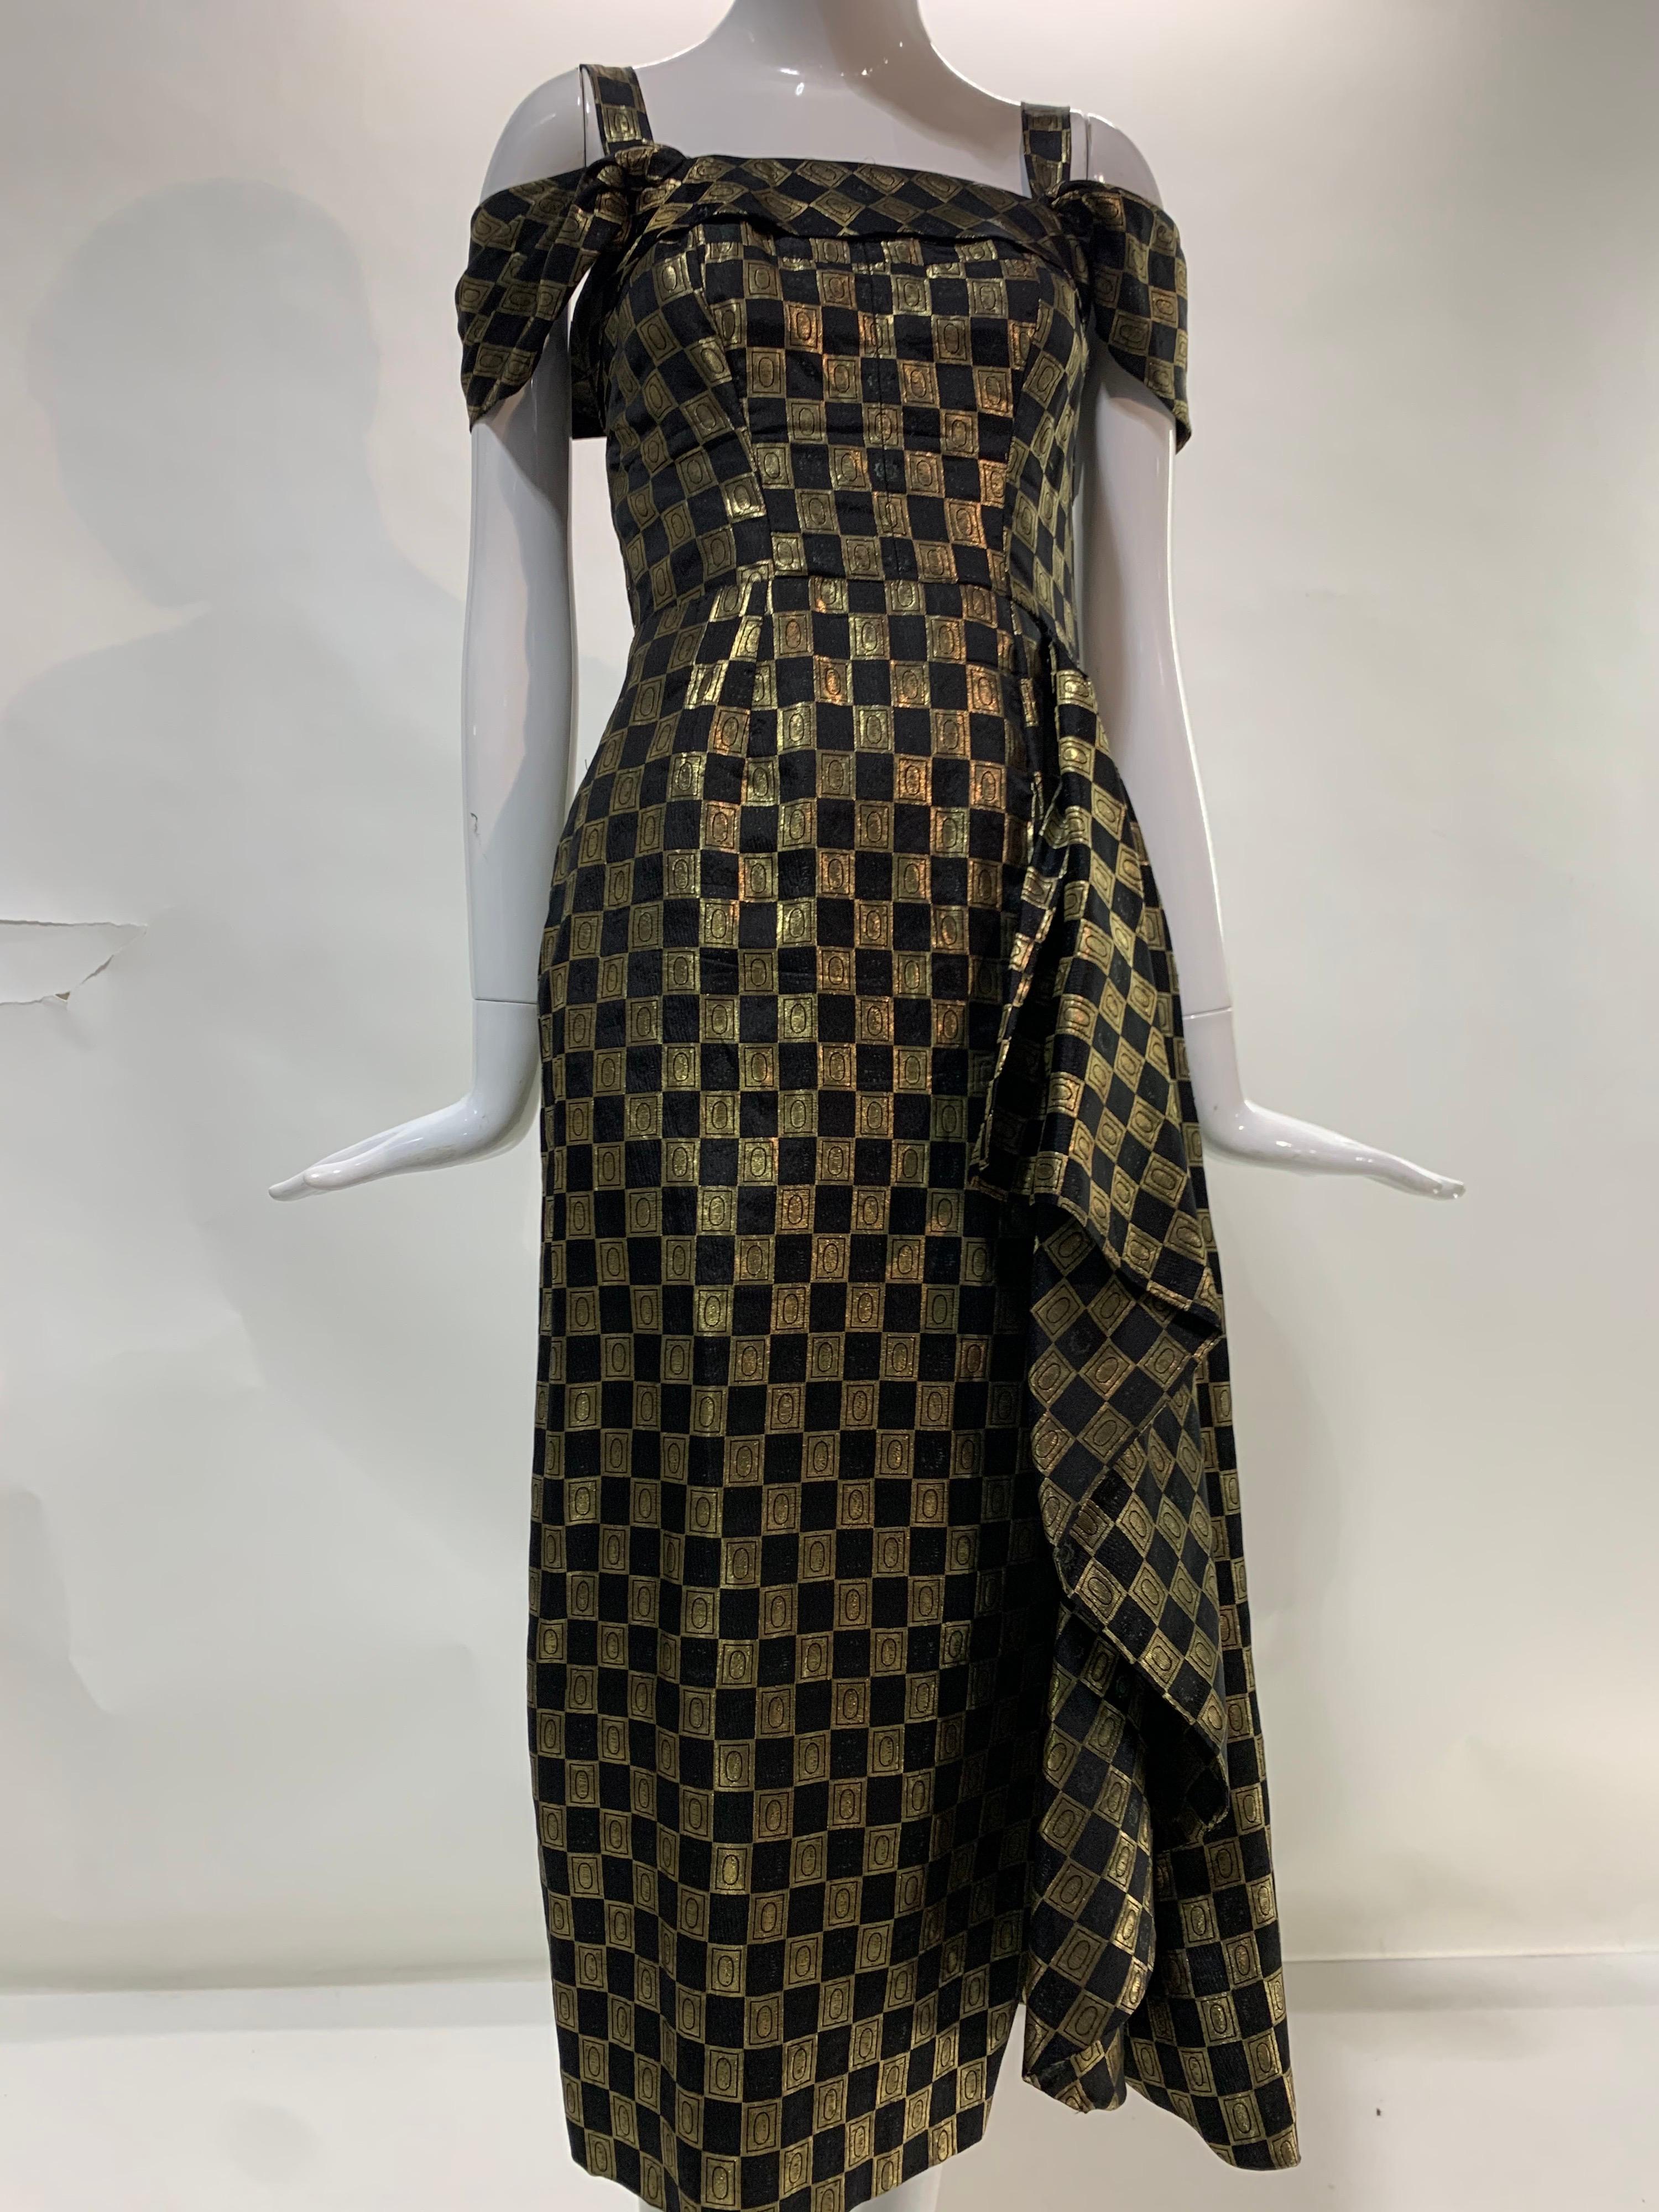 A fabulous late 1940s Curtis - Modas Rio demi-couture black and gold lame checked brocade evening dress with off-the-shoulder drape and extravagantly draped side. Structured bodice. Back zipper. Size 6-8.